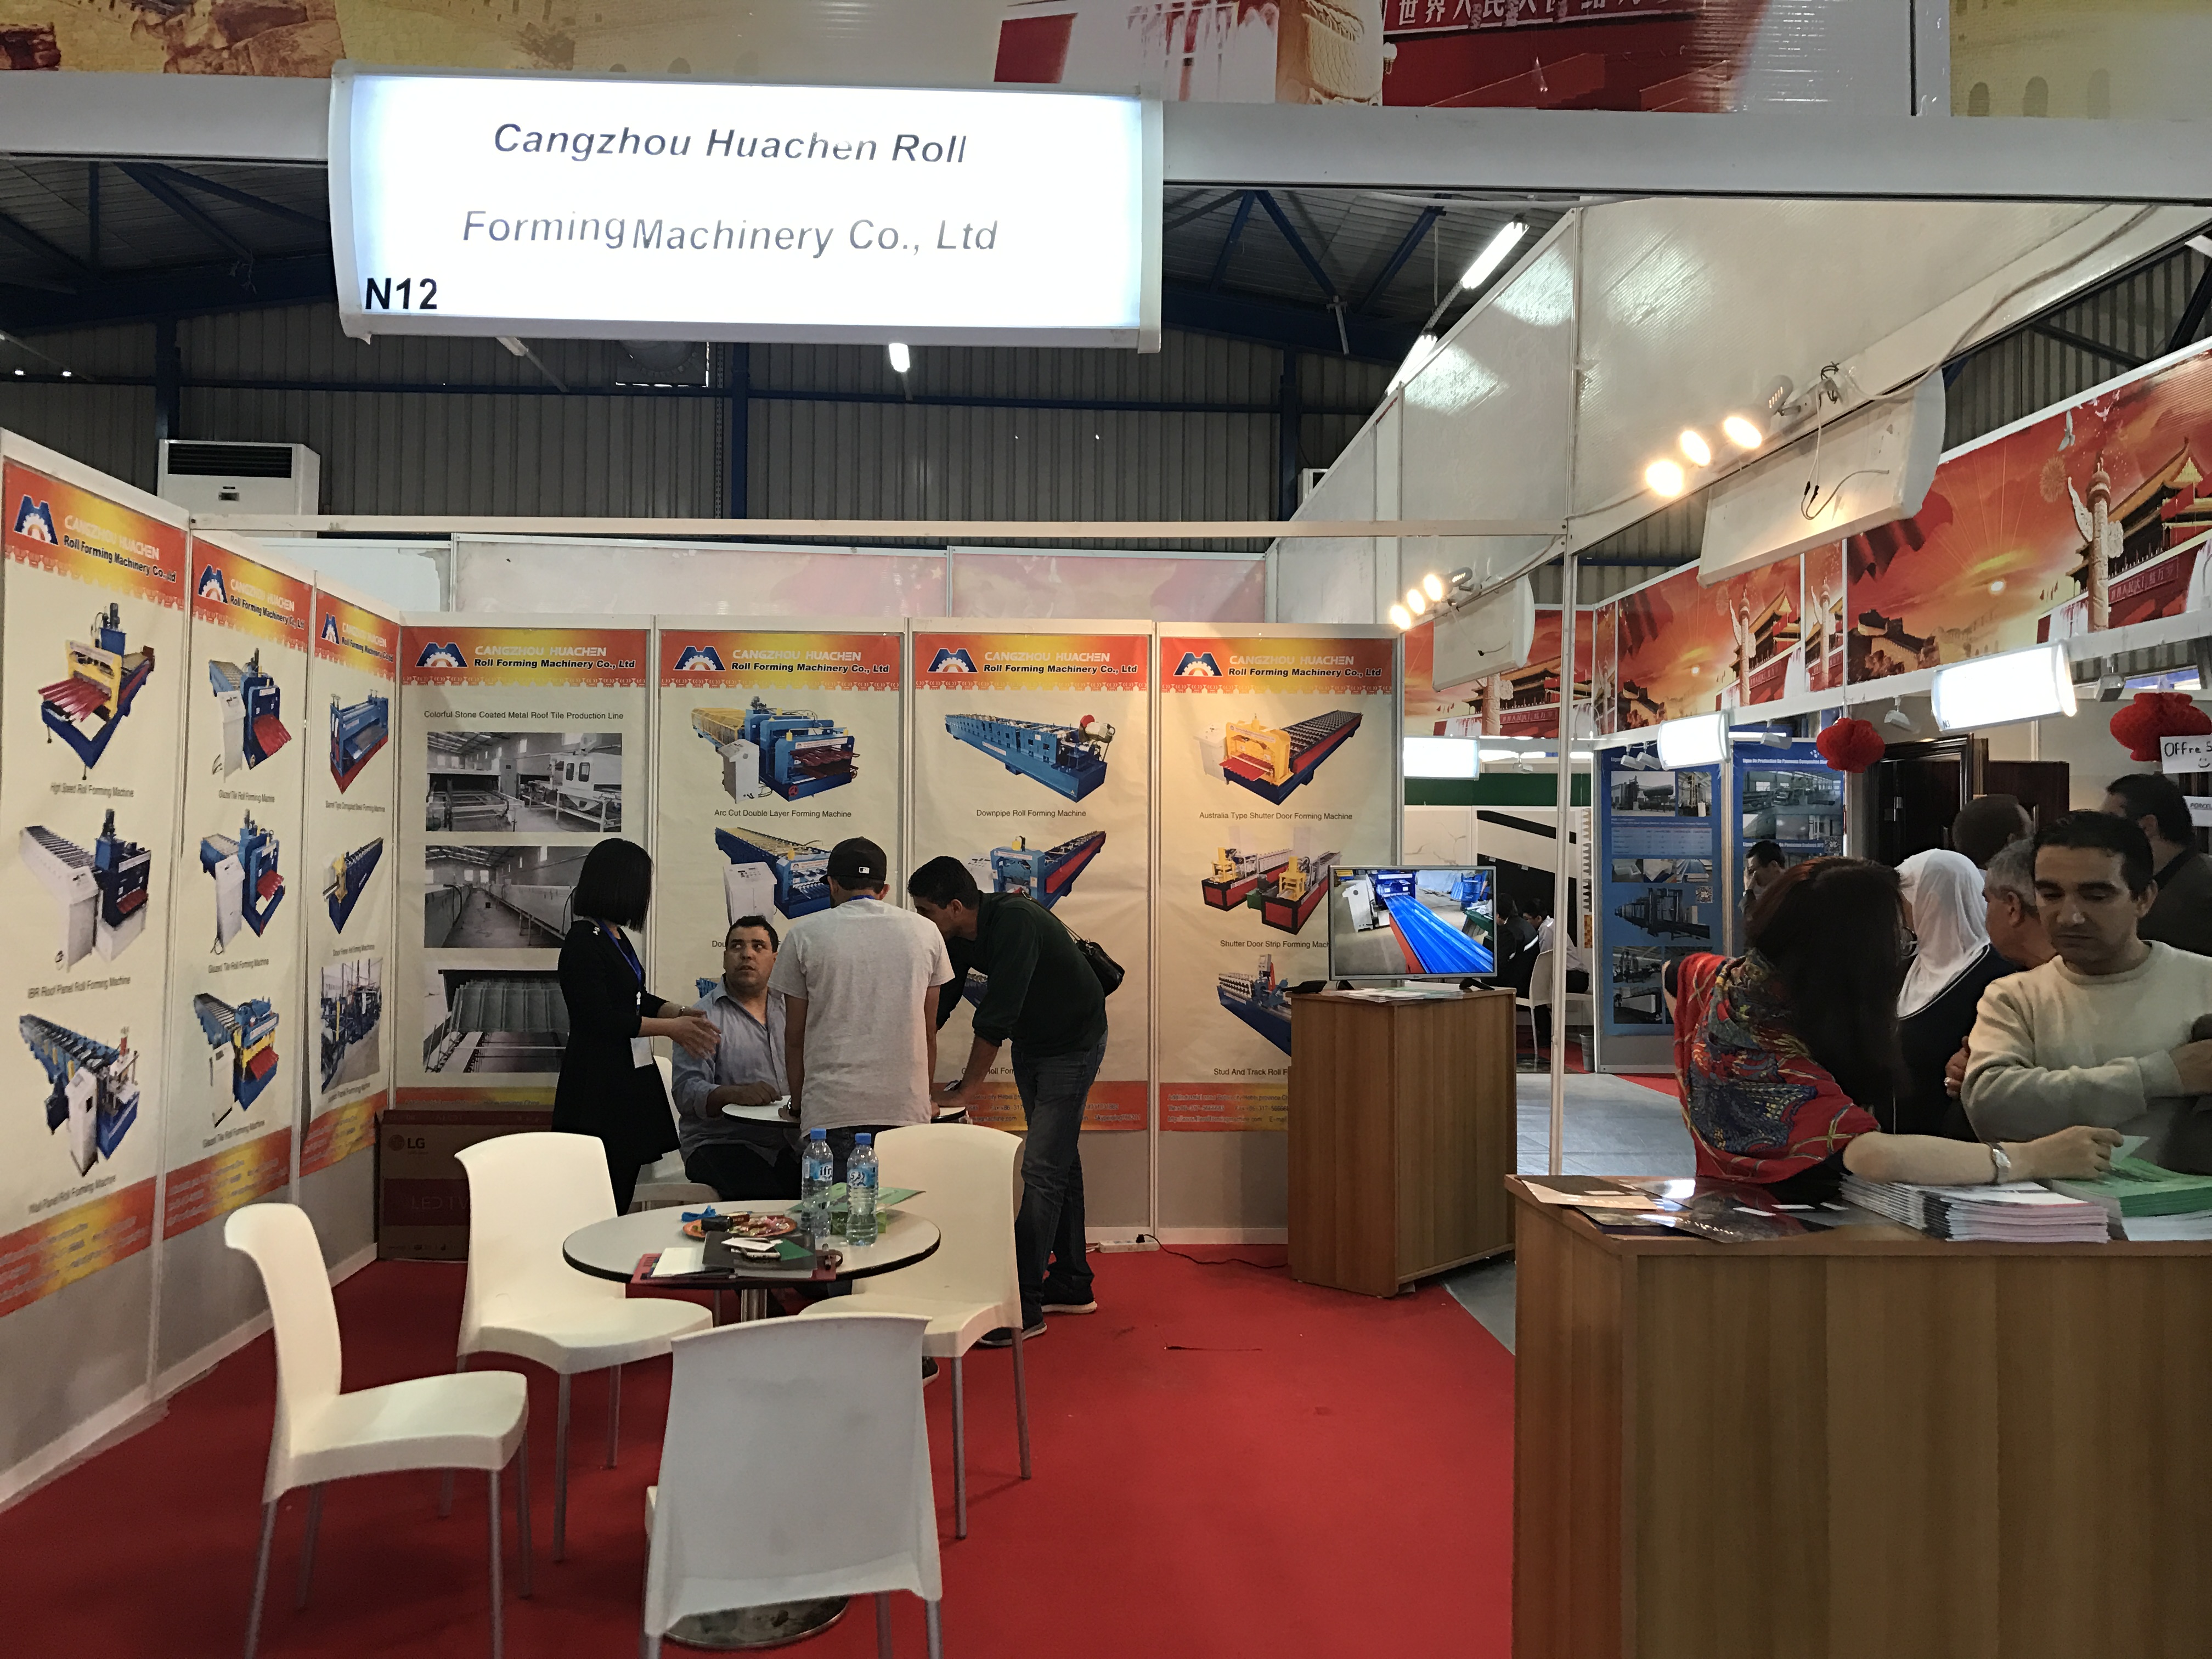 In 2019, We participated in the building materials exhibition in Santiago, Chile.